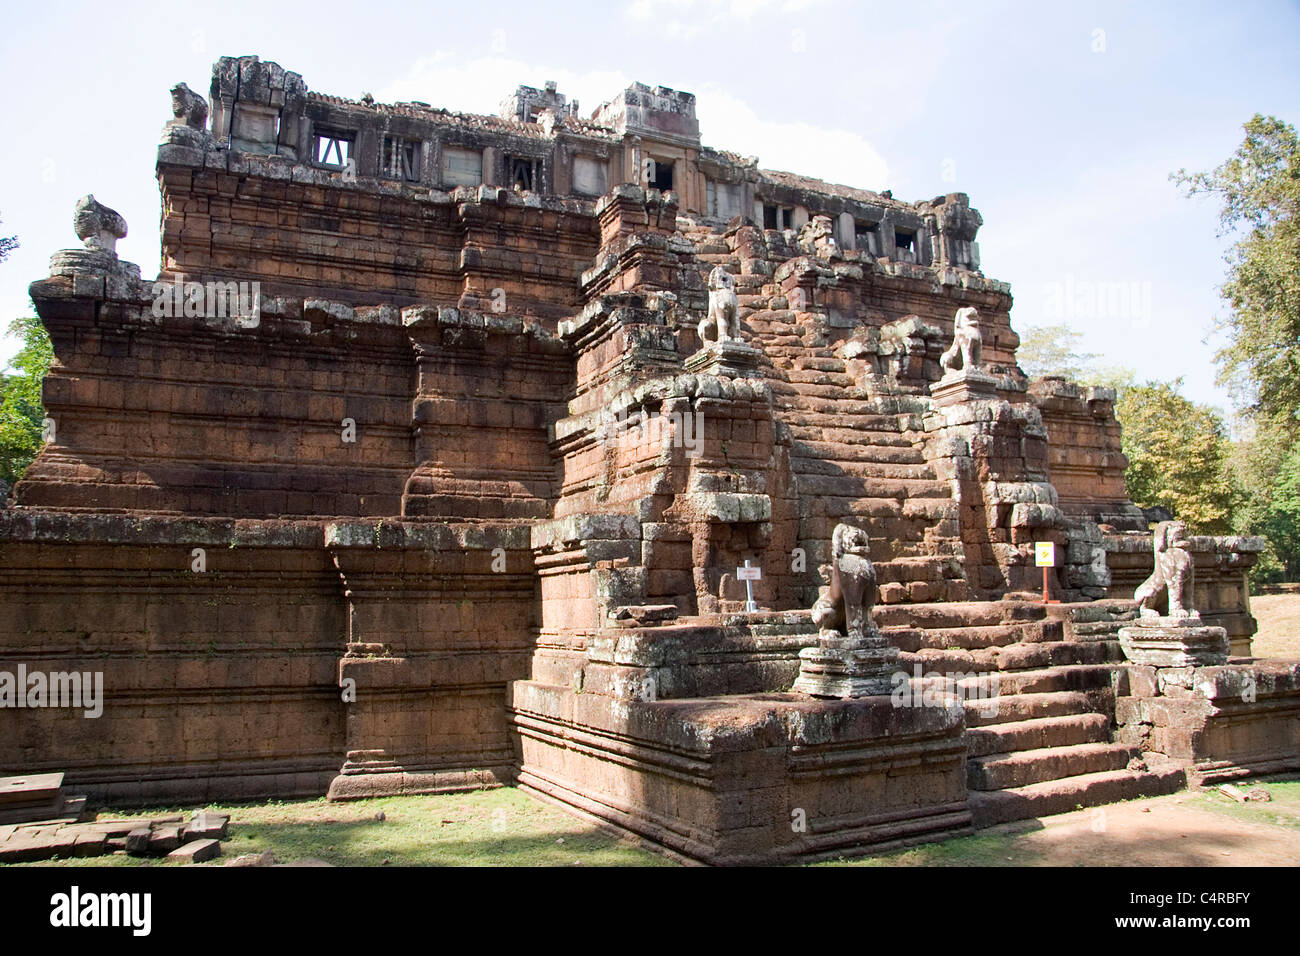 Some of the major temples in Angkor Wat, Cambodia Stock Photo